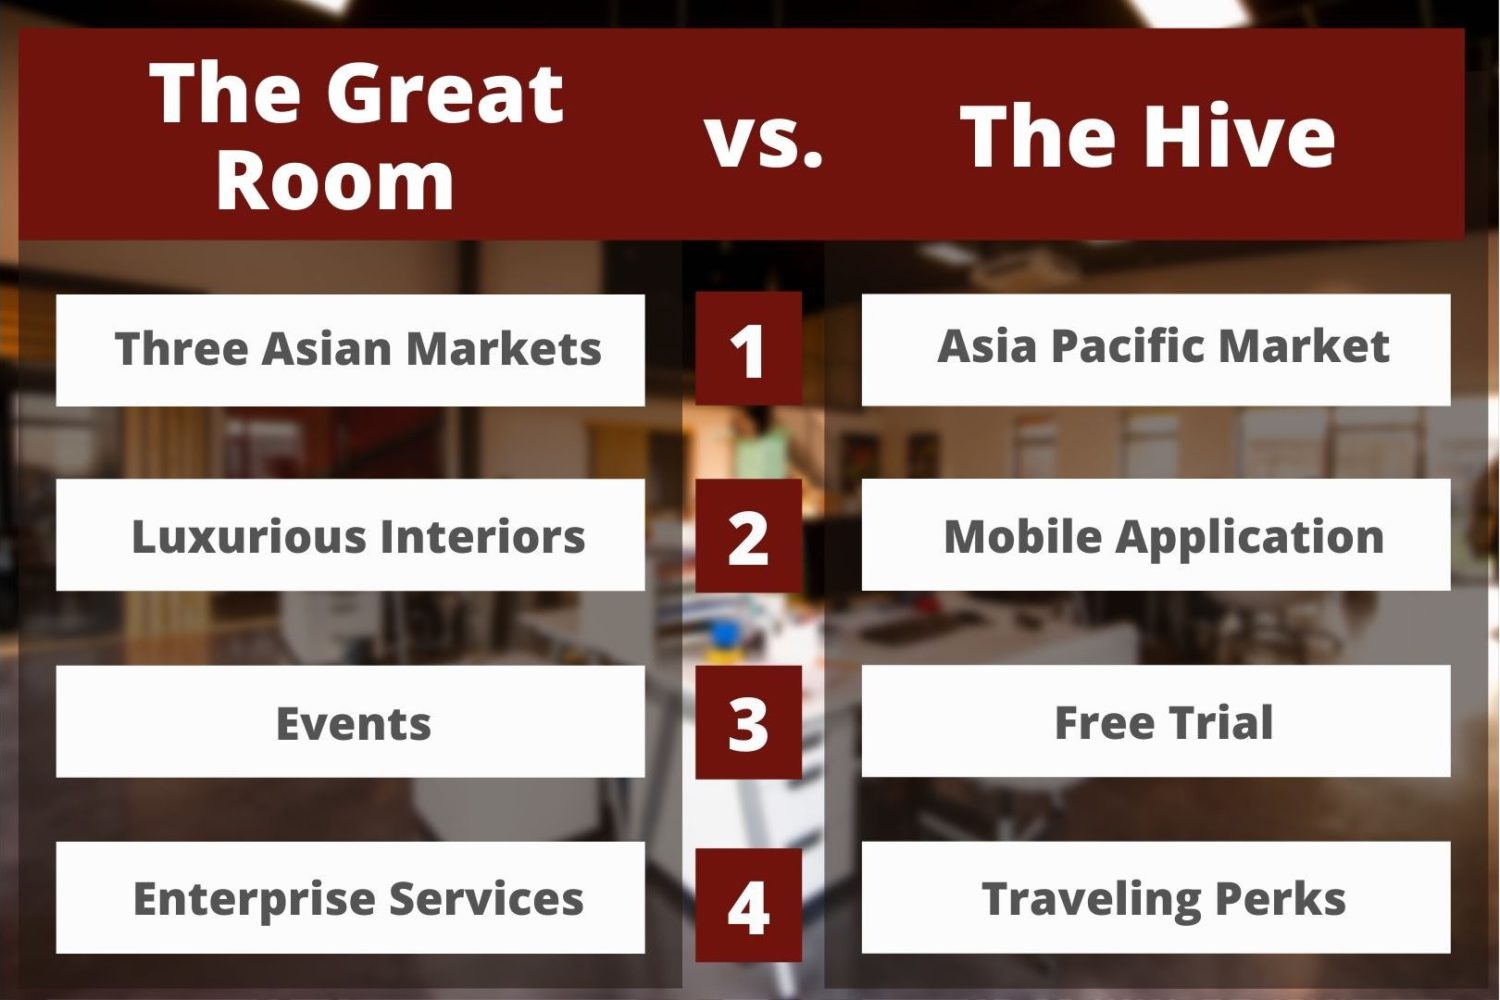 The Great Room vs The Hive